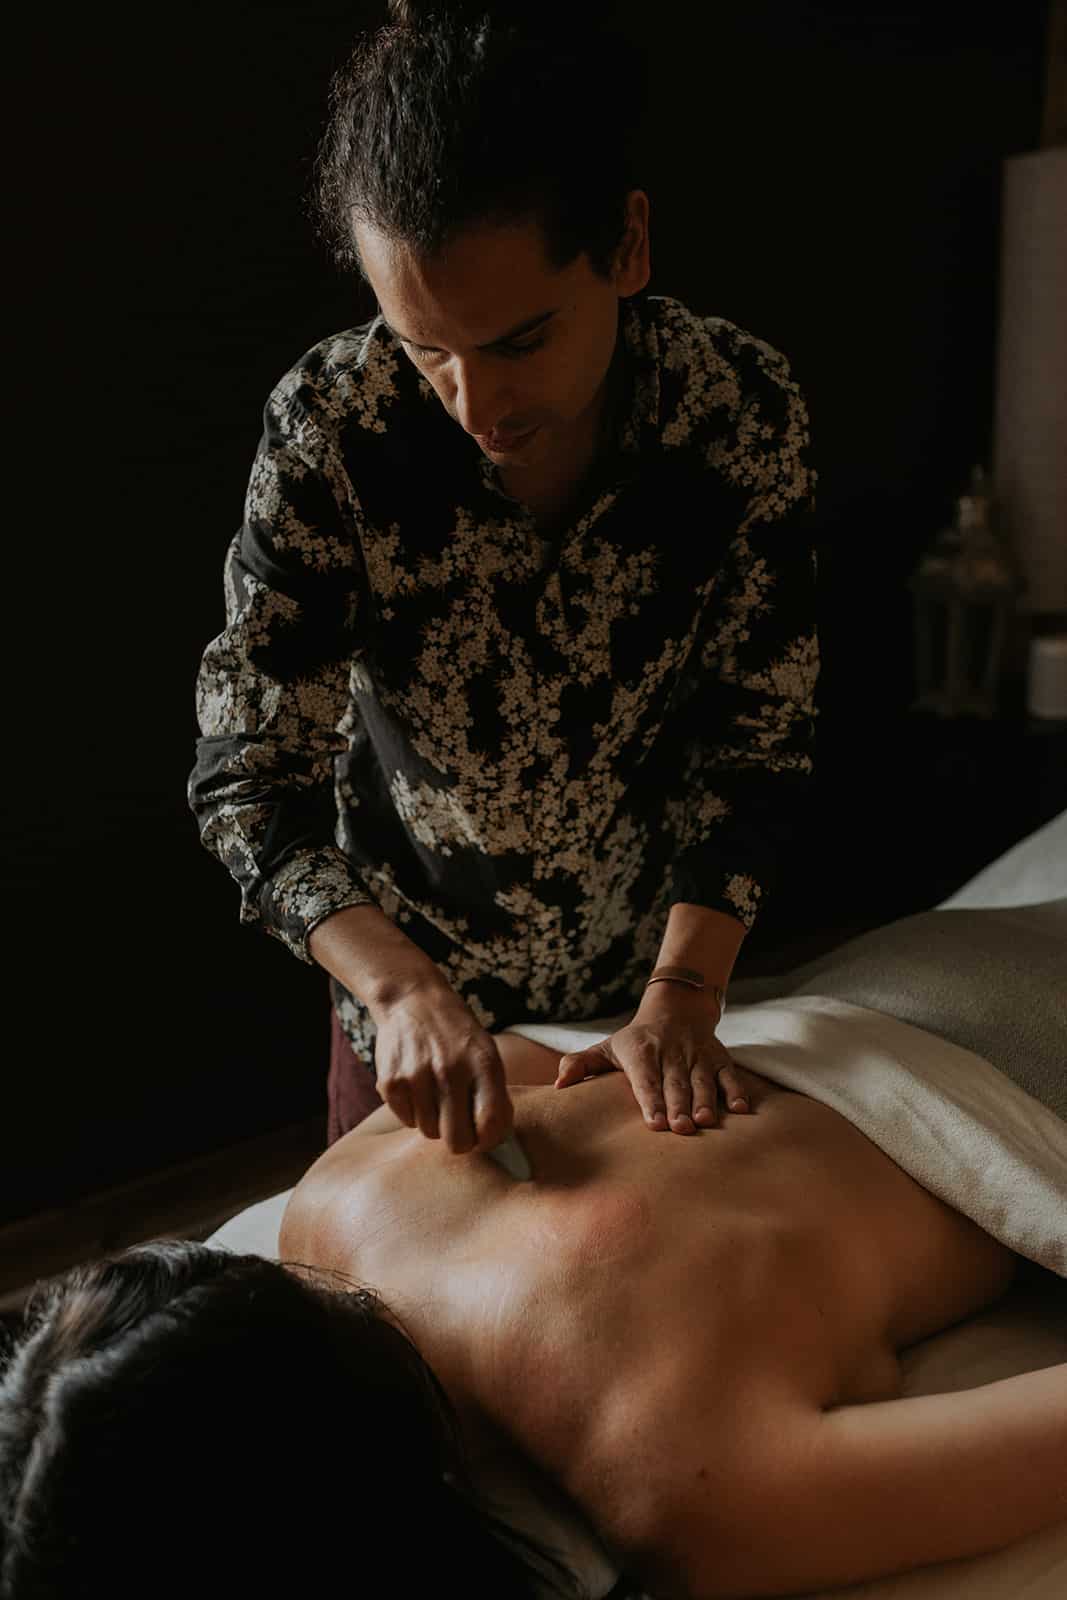 A male acupuncturist precisely inserts needles along a woman's back, targeting key acupuncture points for relief.